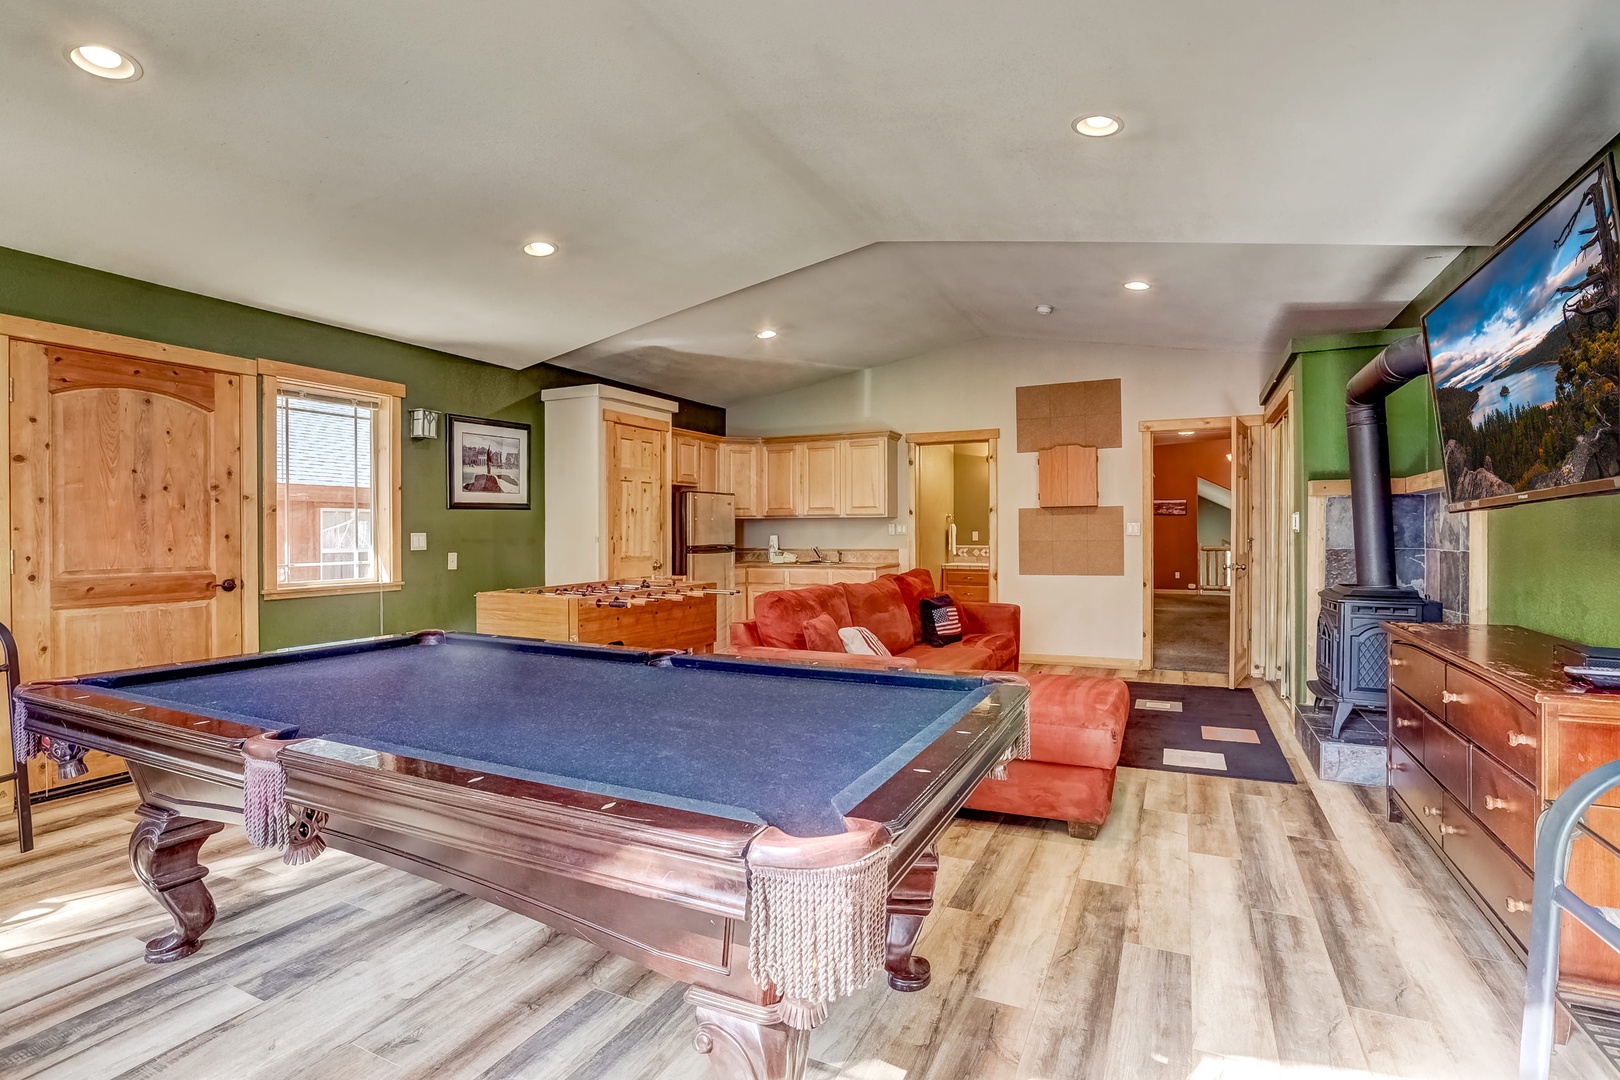 Game room with pool table, foosball table, dart board, cable TV